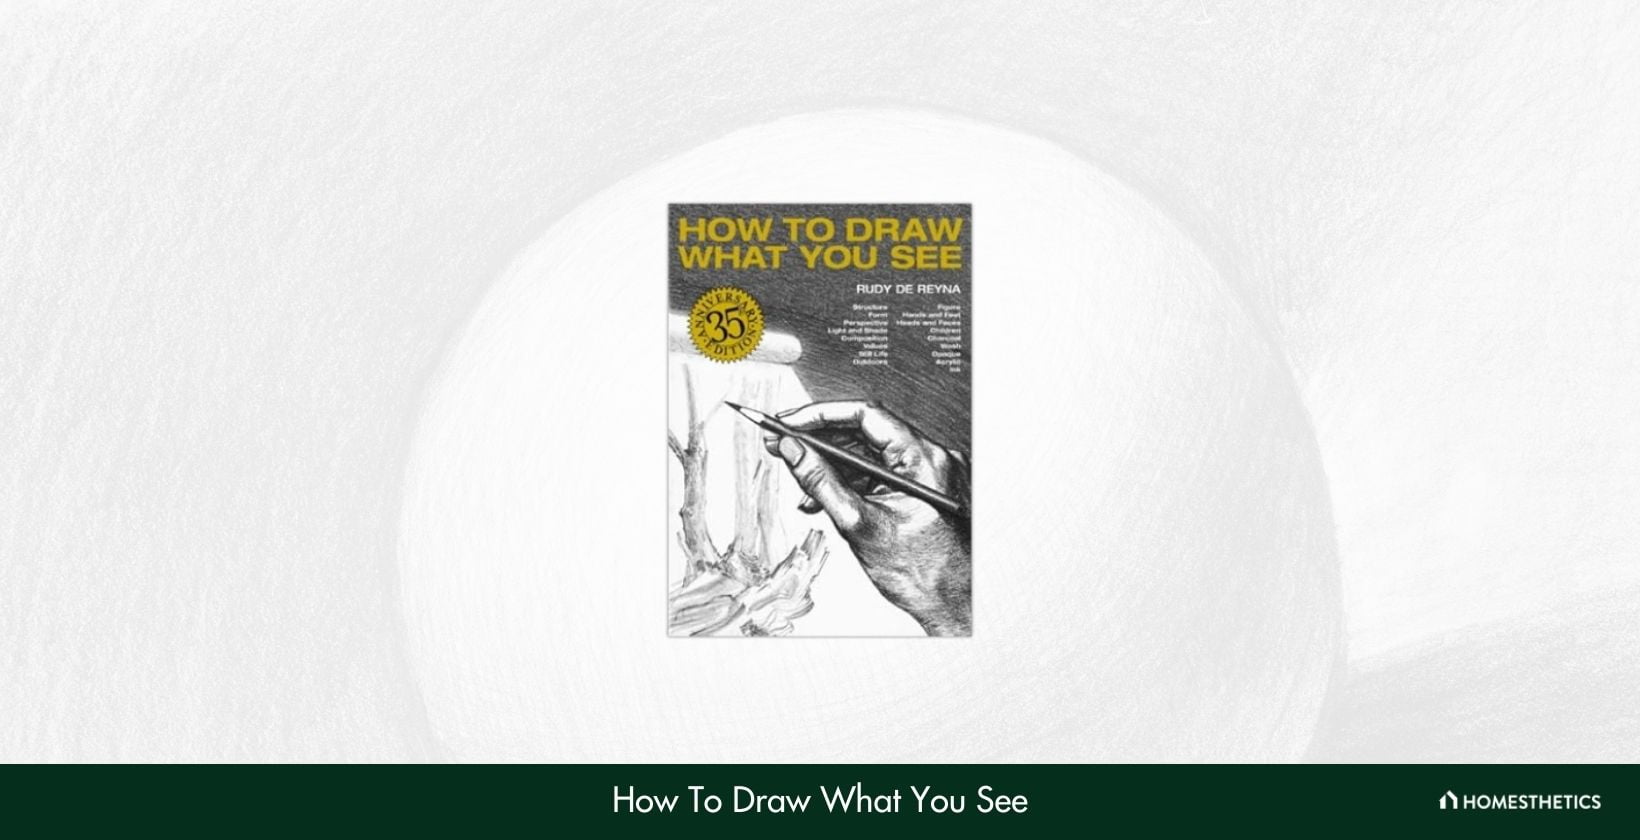 How To Draw What You See by Rudy de Reyna